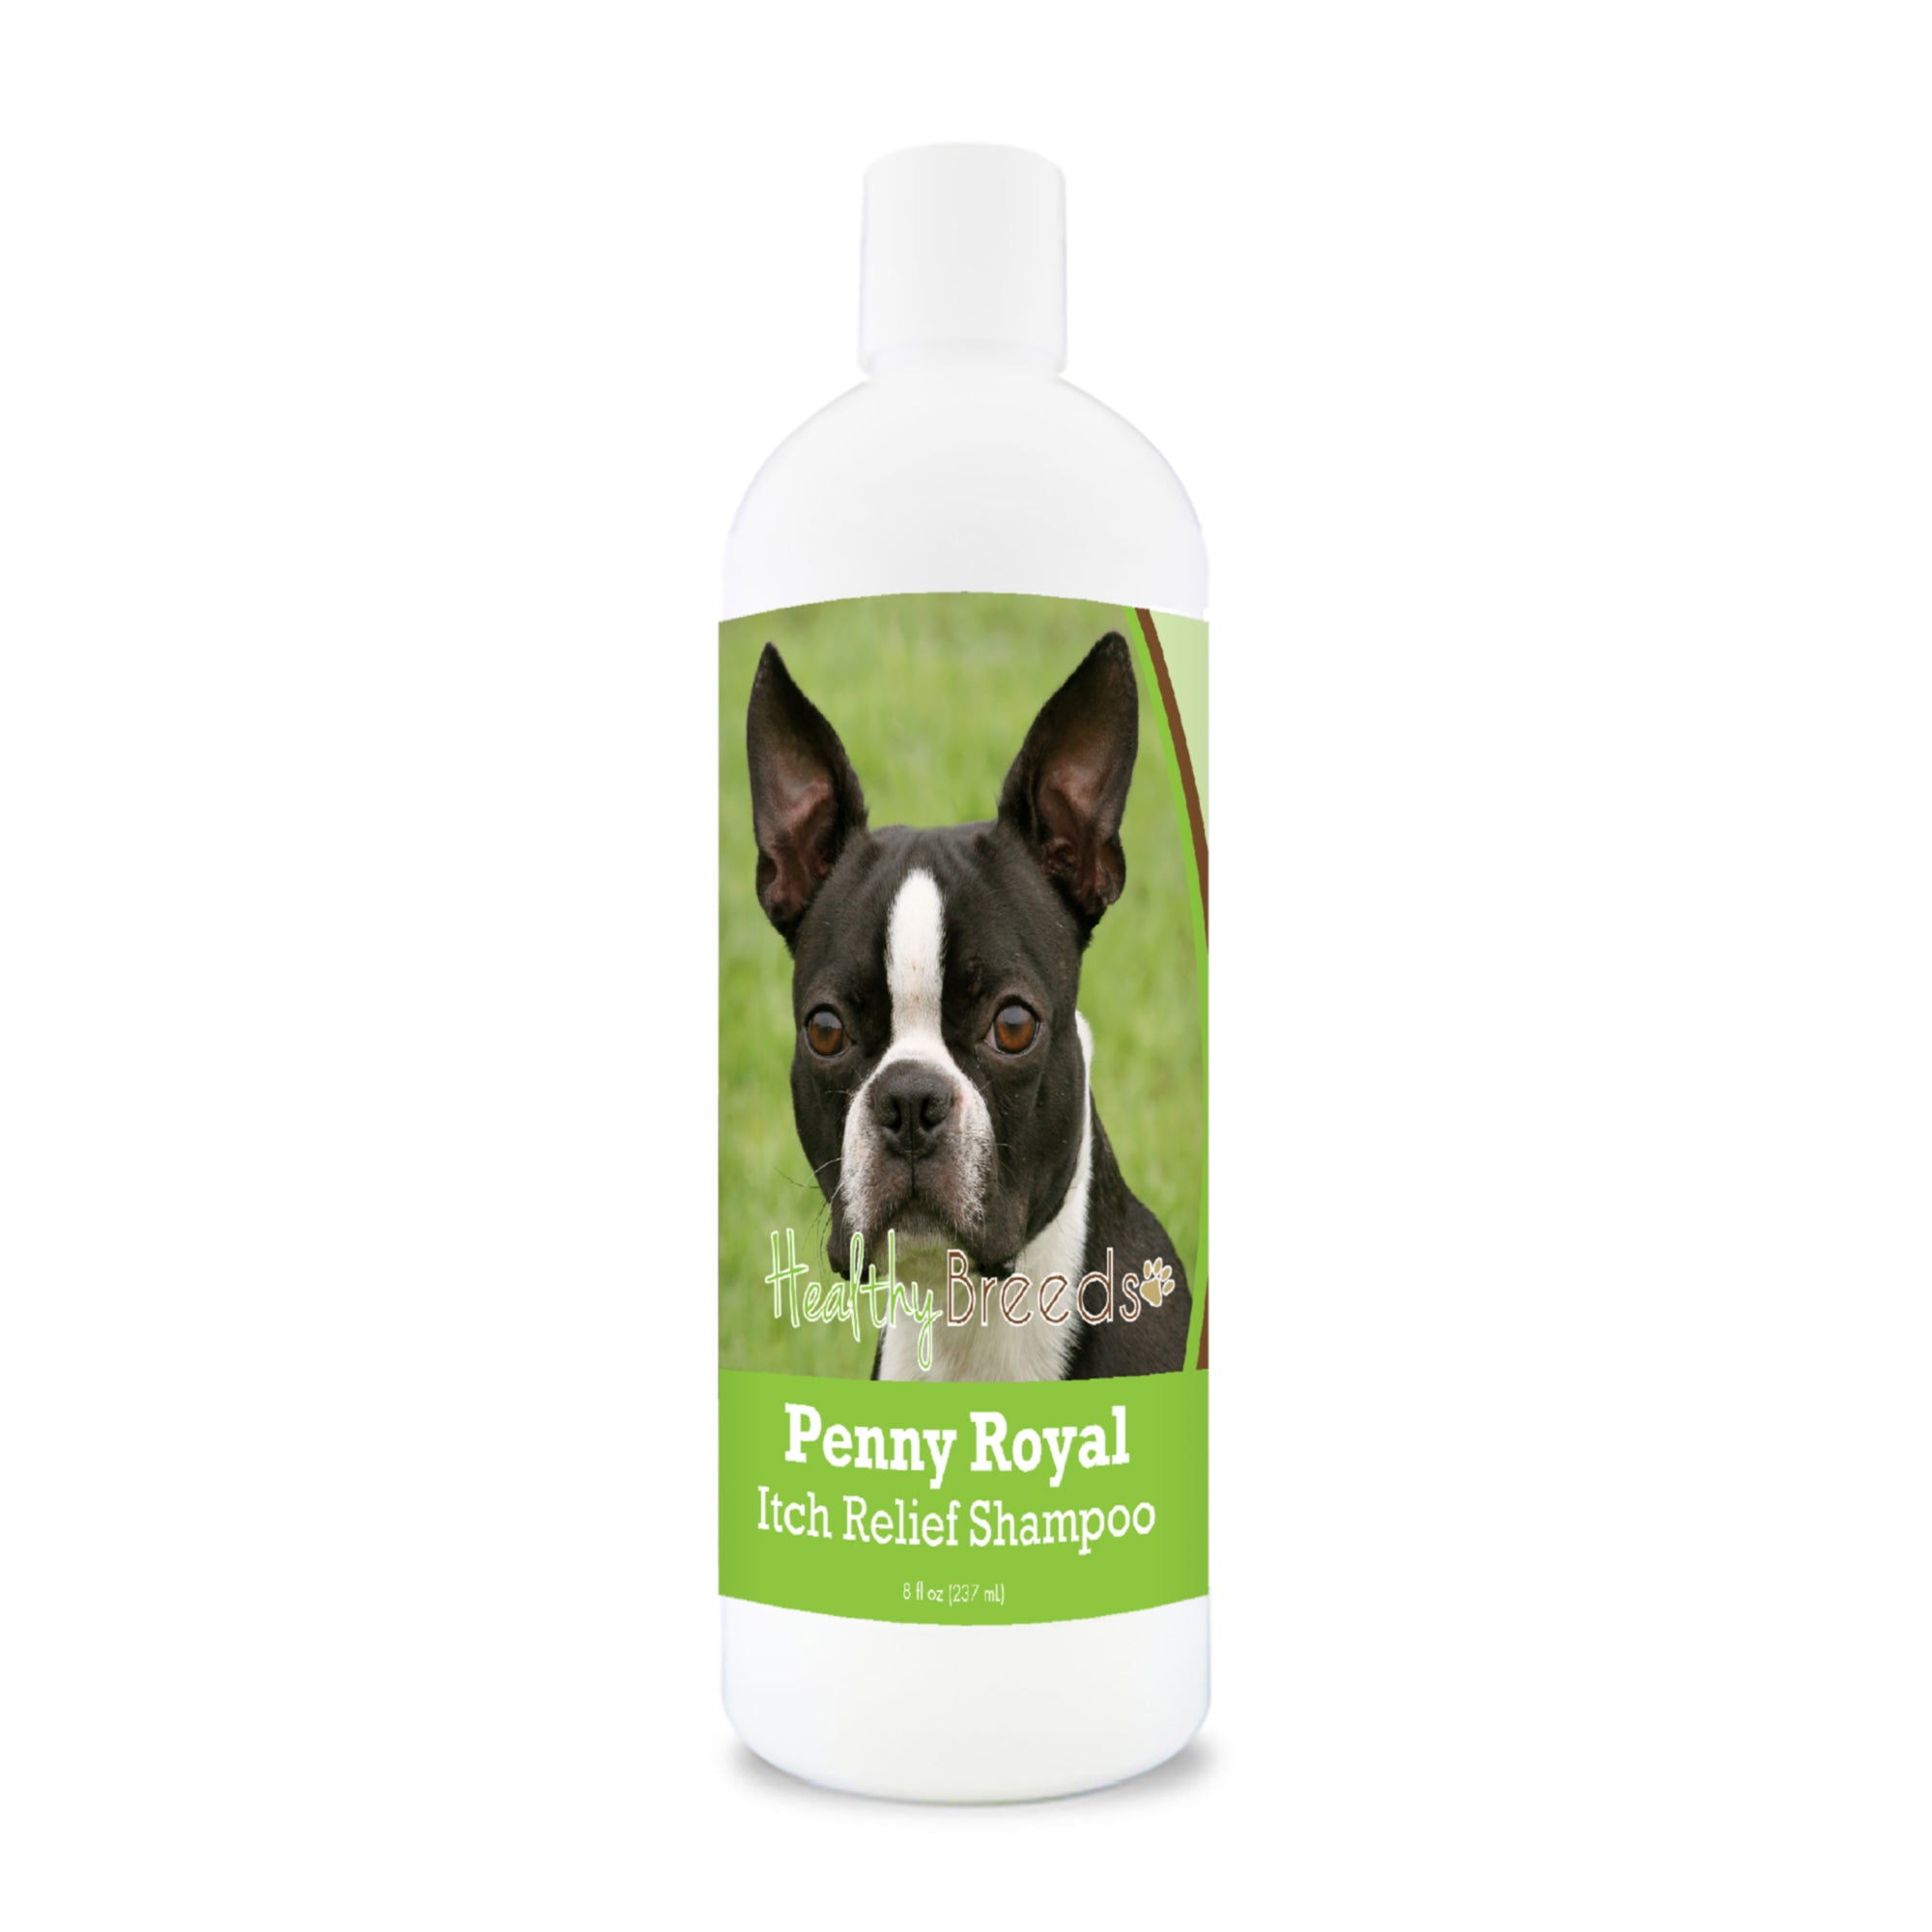 Boston Terrier Penny Royal Itch Relief Shampoo 8 oz